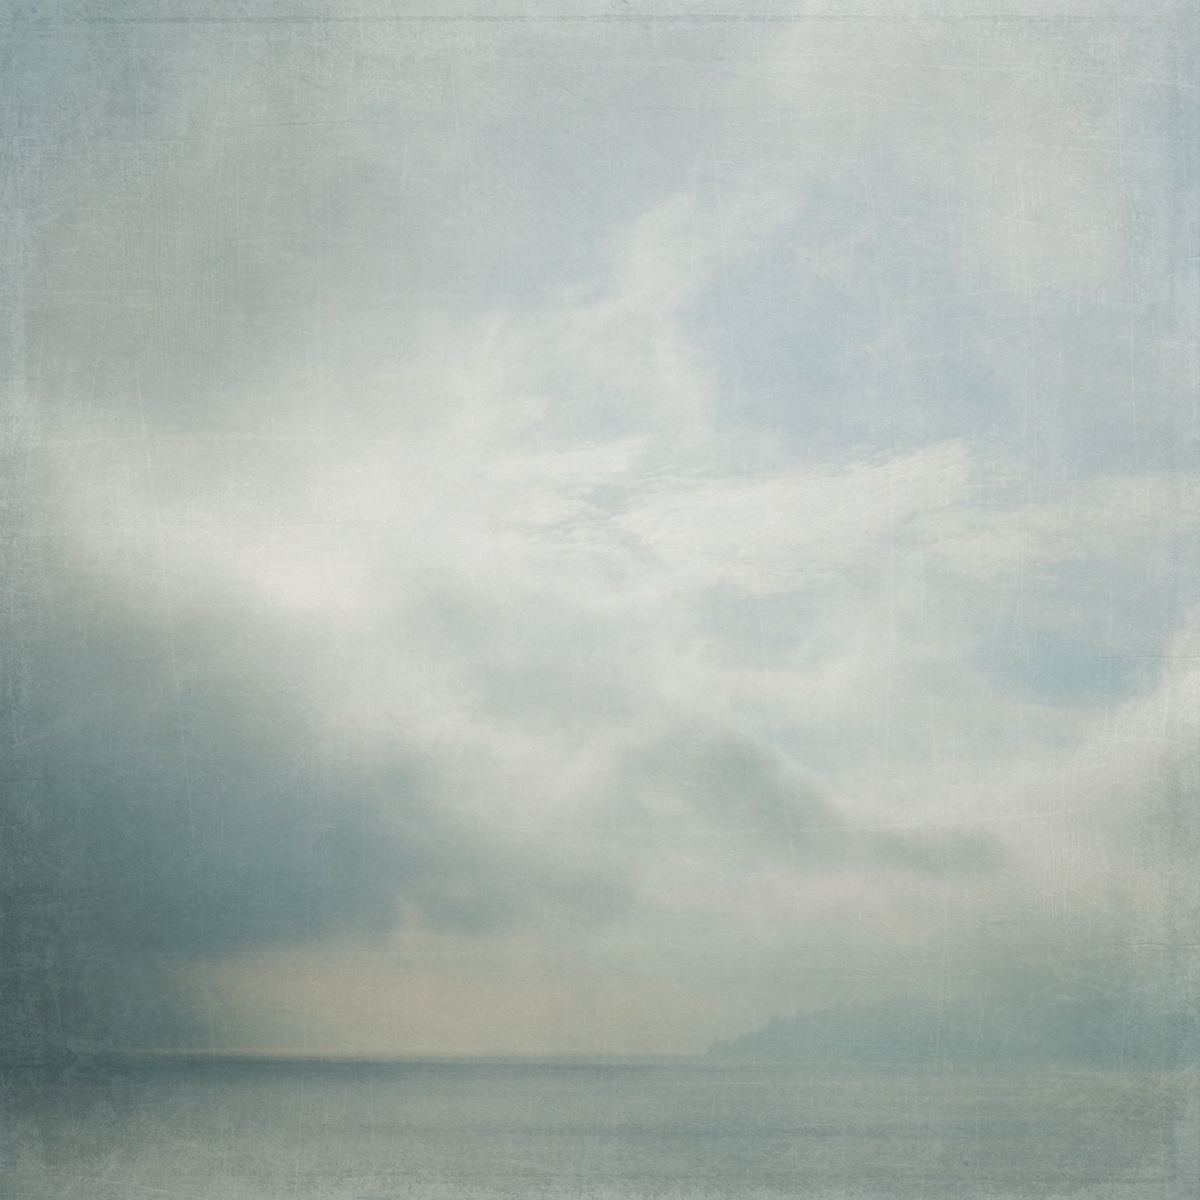 seascape misty cloudy atmospheric Puget Sound Colvos Passage Sally Banfill textured photos